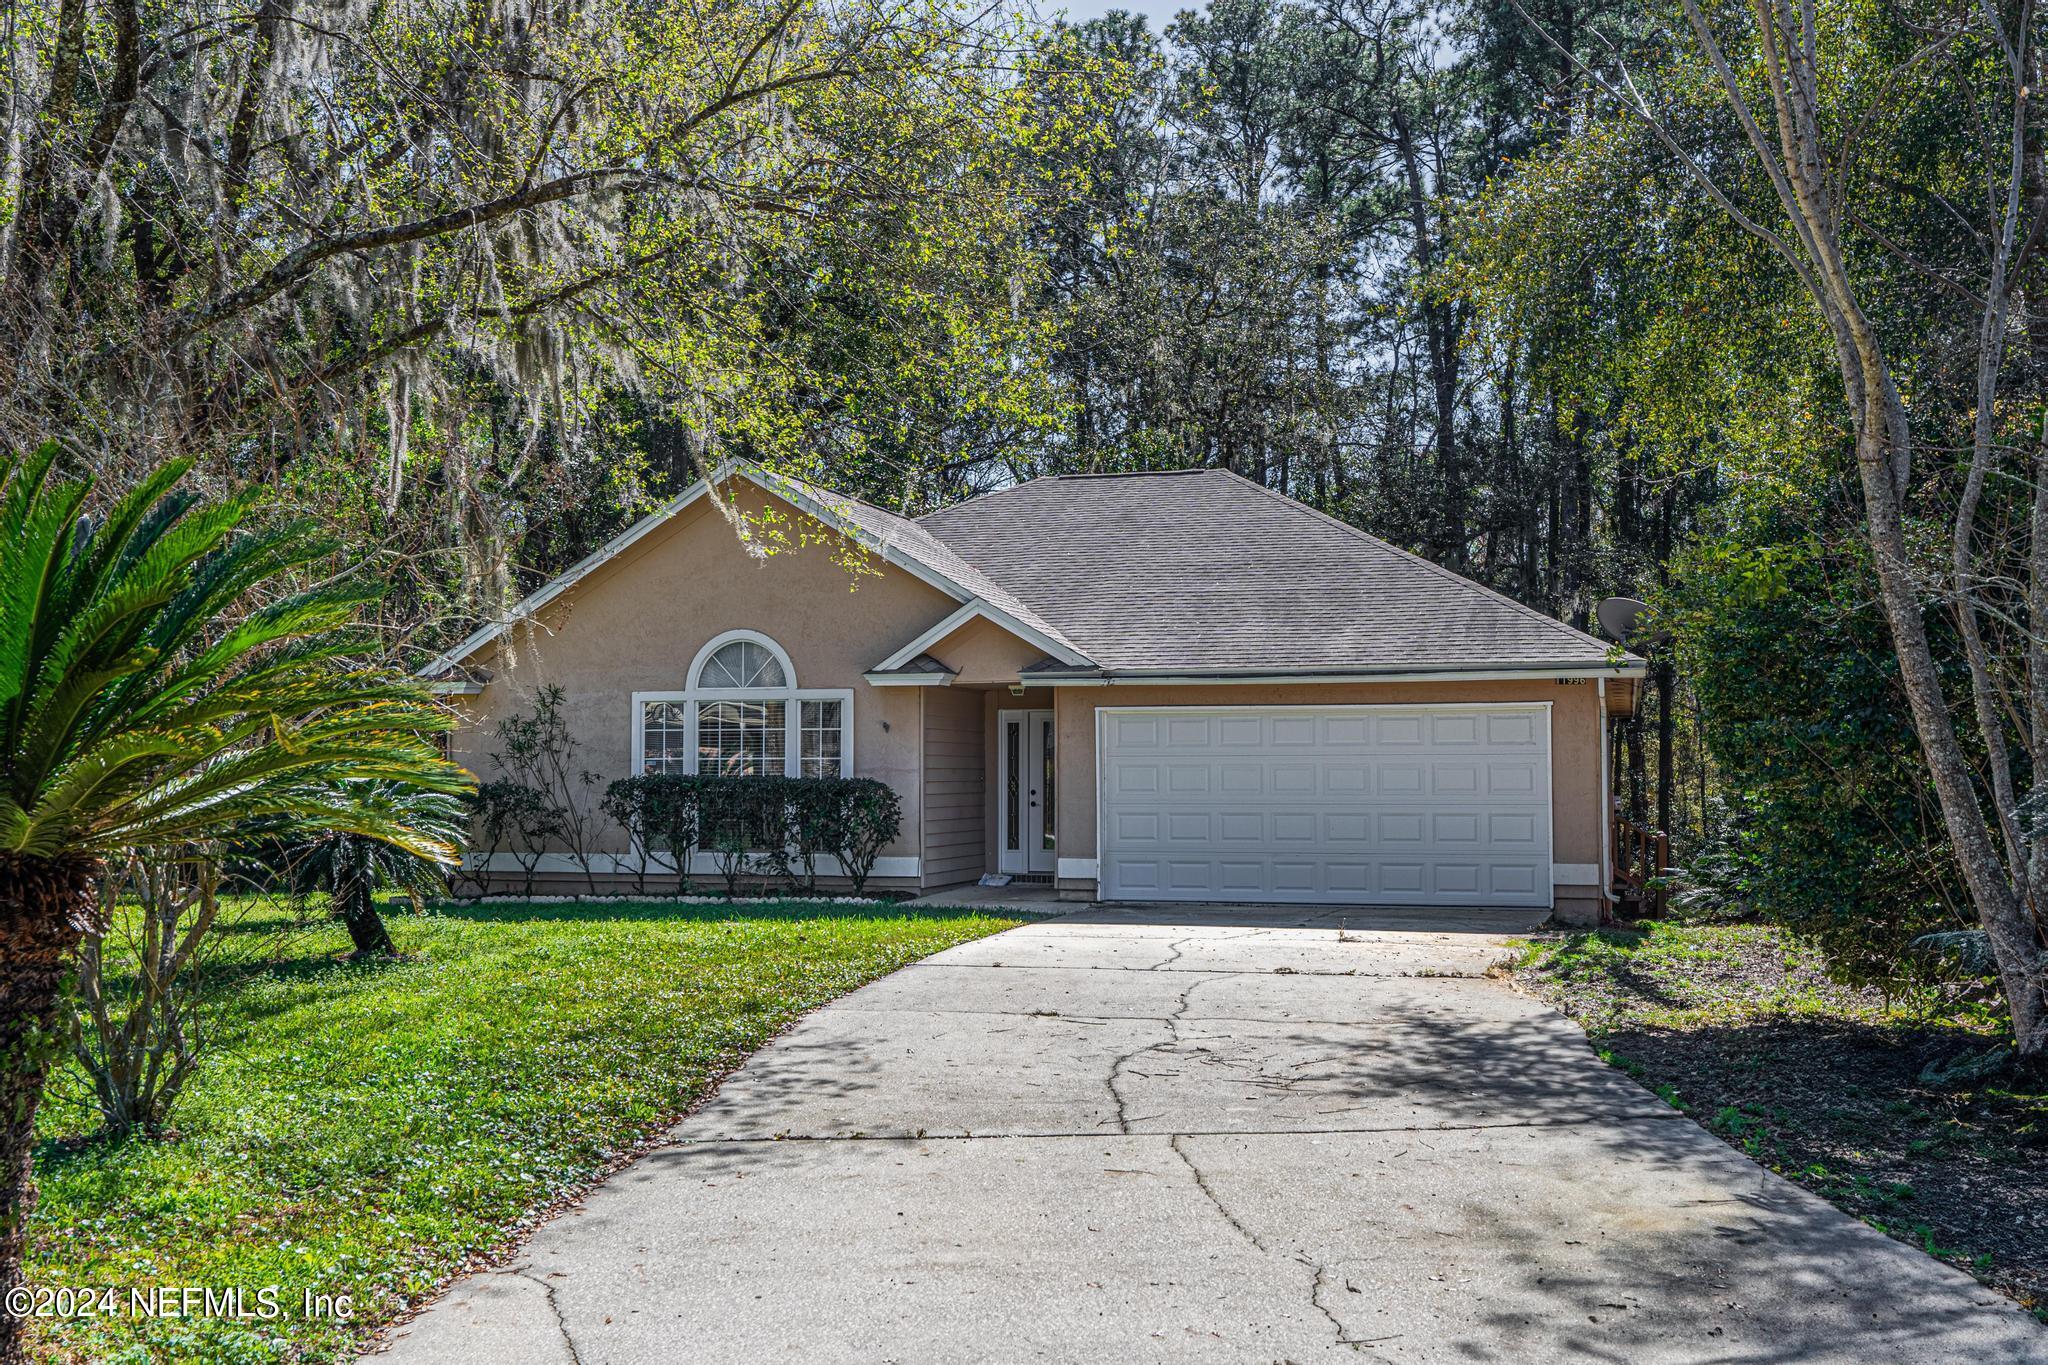 Jacksonville, FL home for sale located at 11996 SWOOPING WILLOW Road, Jacksonville, FL 32223